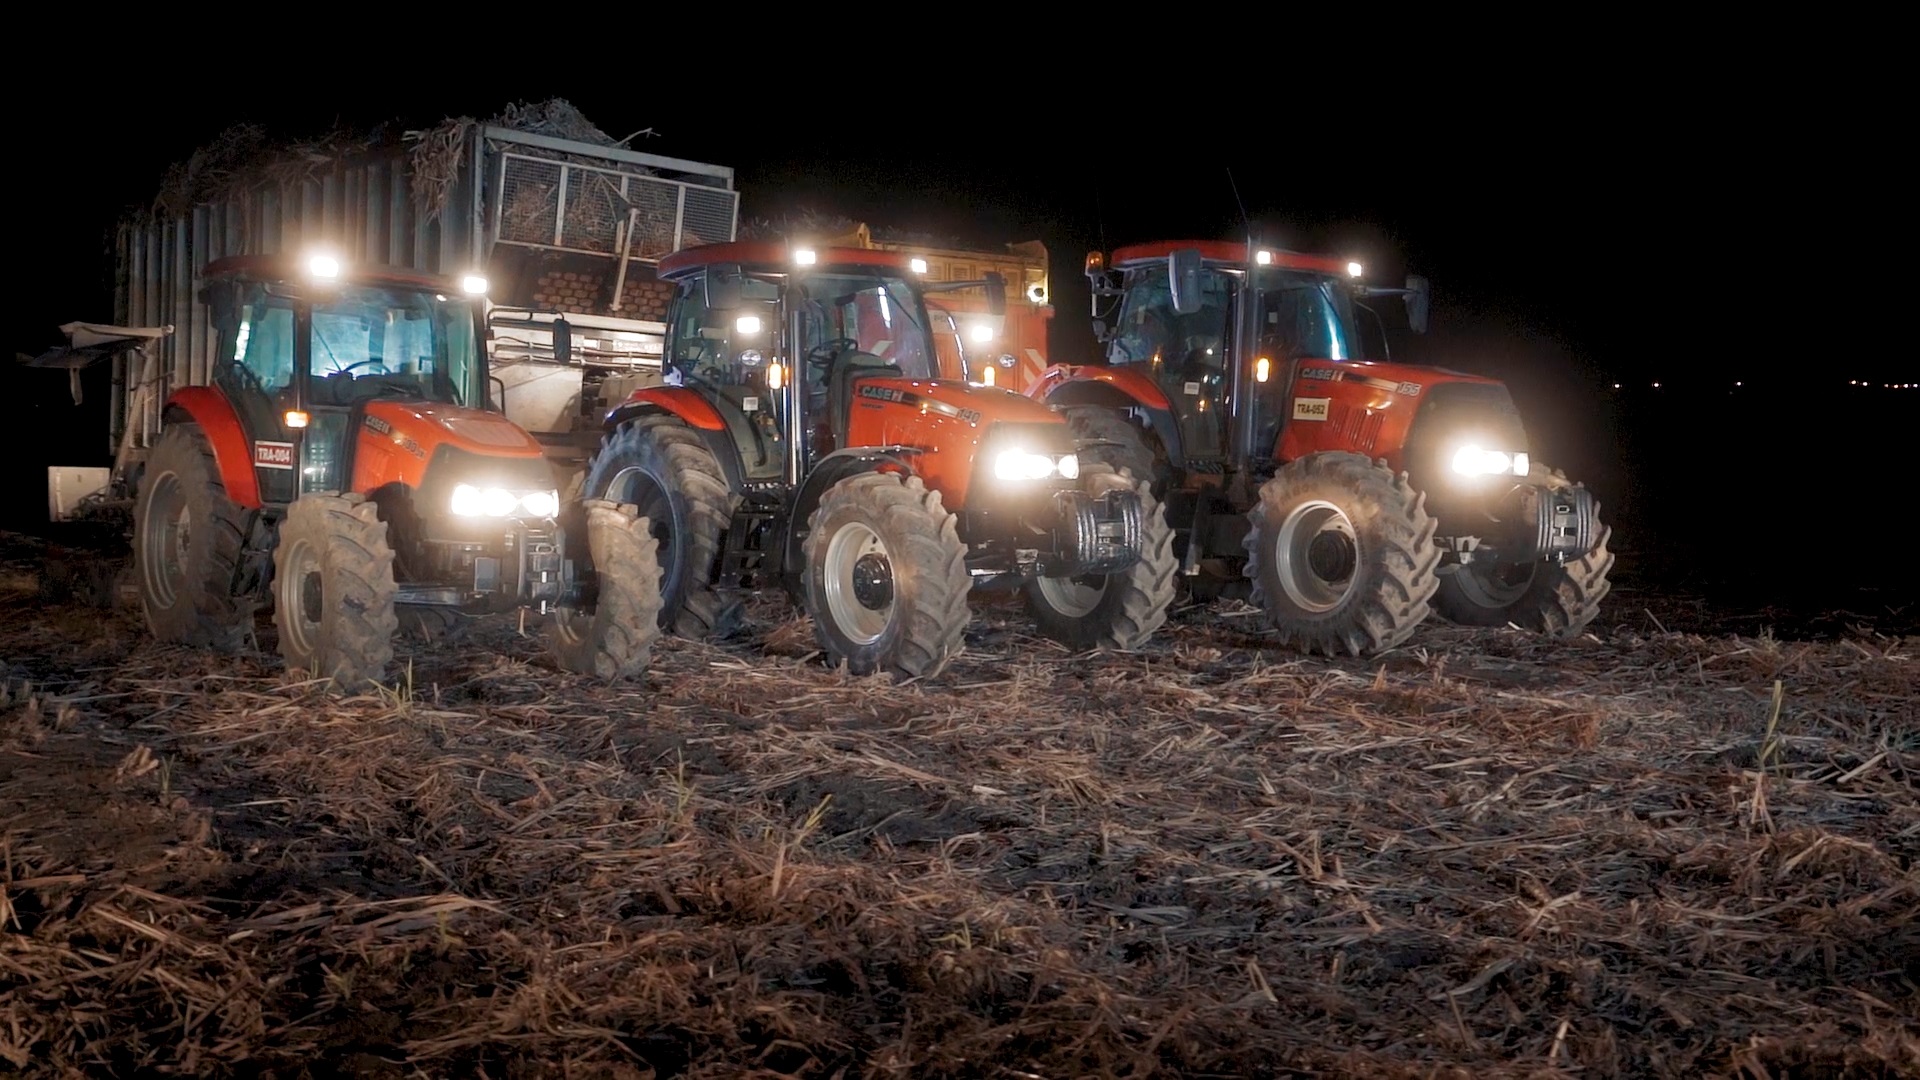 Case IH tractors play key role in renewable energy operation turning sugarcane waste into valuable commodity